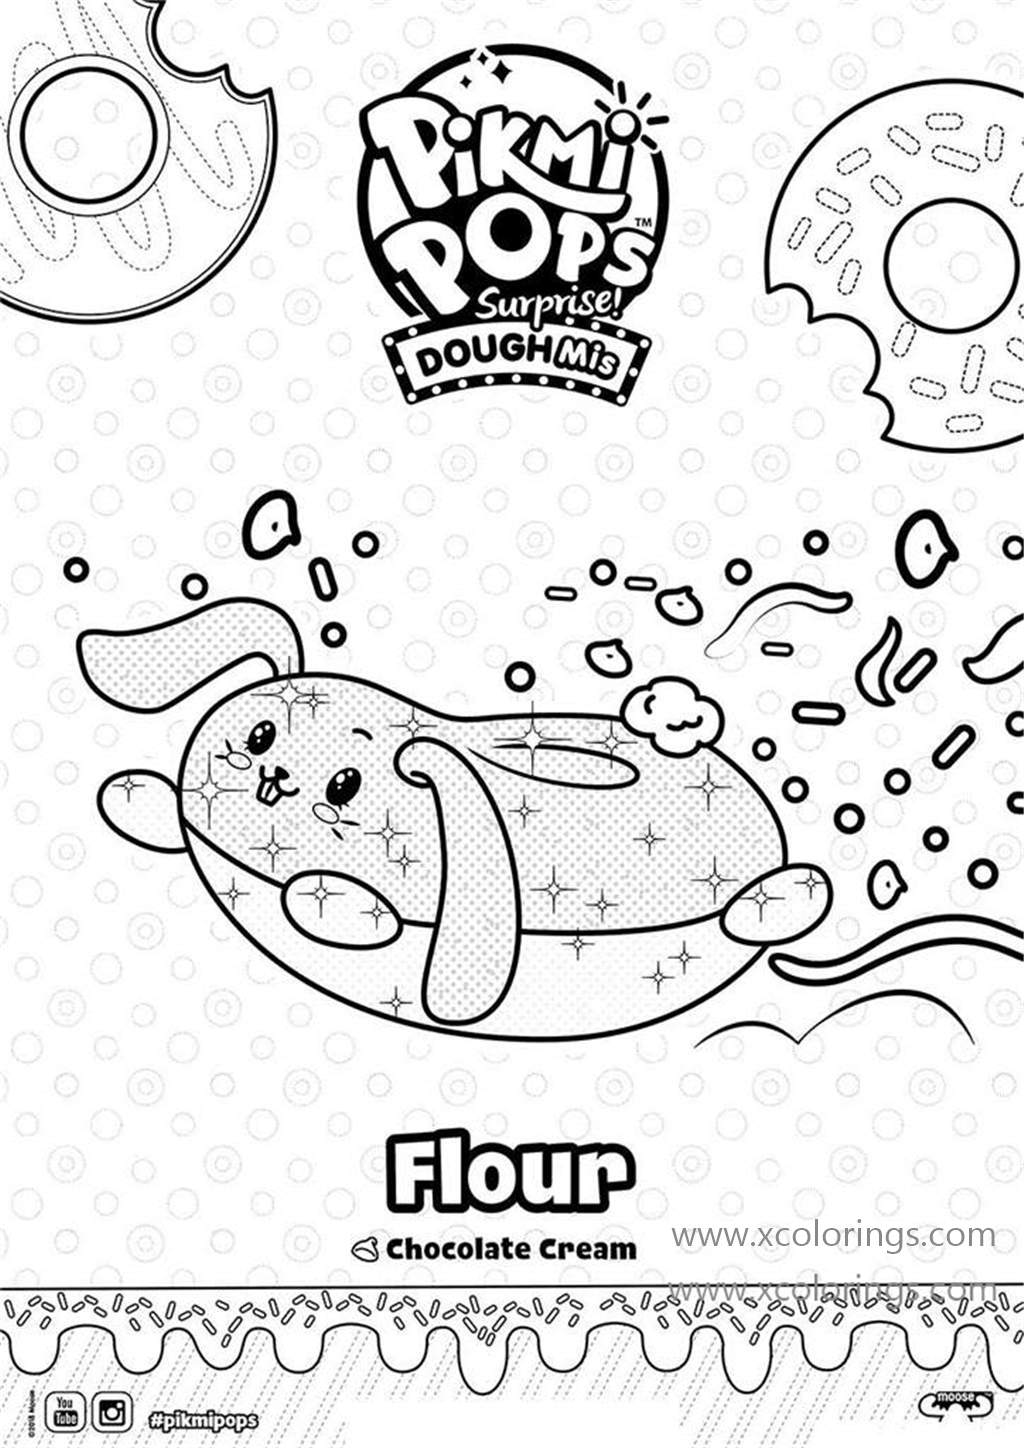 Free Pikmi Pops Coloring Pages Flour The Bunny printable